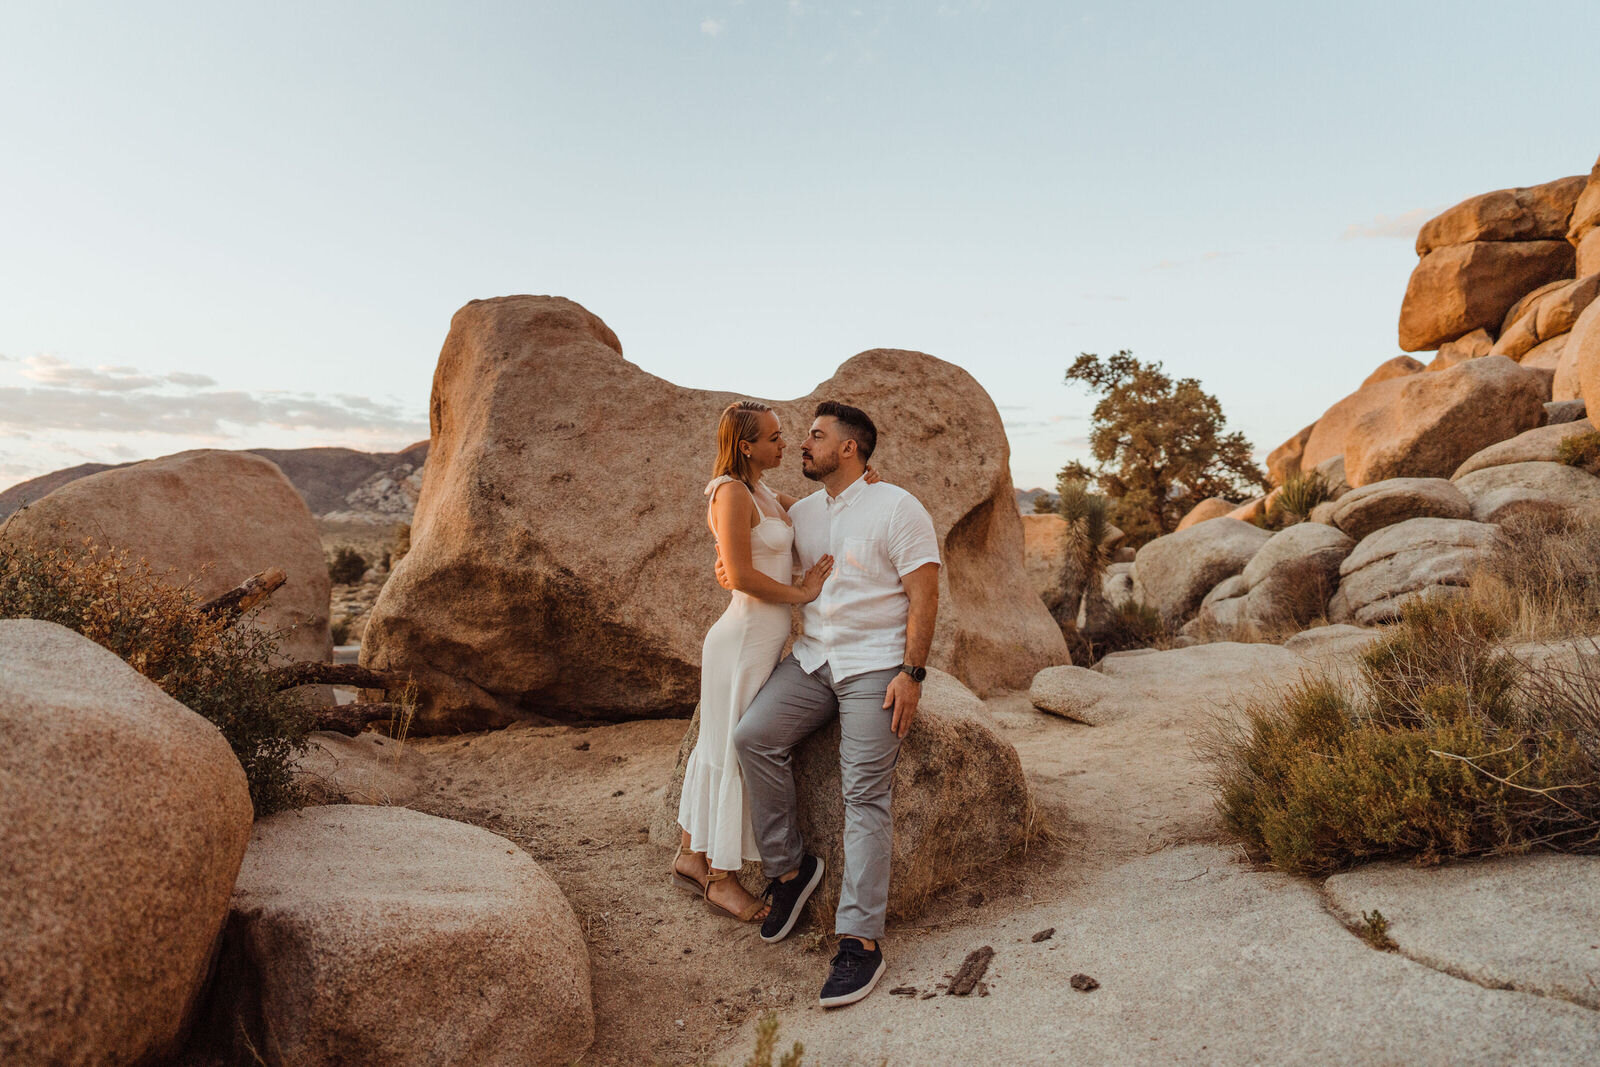 Couple surrounded by Boulders in Joshua Tree at Sunrise Summer Engagement Session - photos by adventurous Joshua Tree elopement photographer Kept Record | www.keptrecord.com